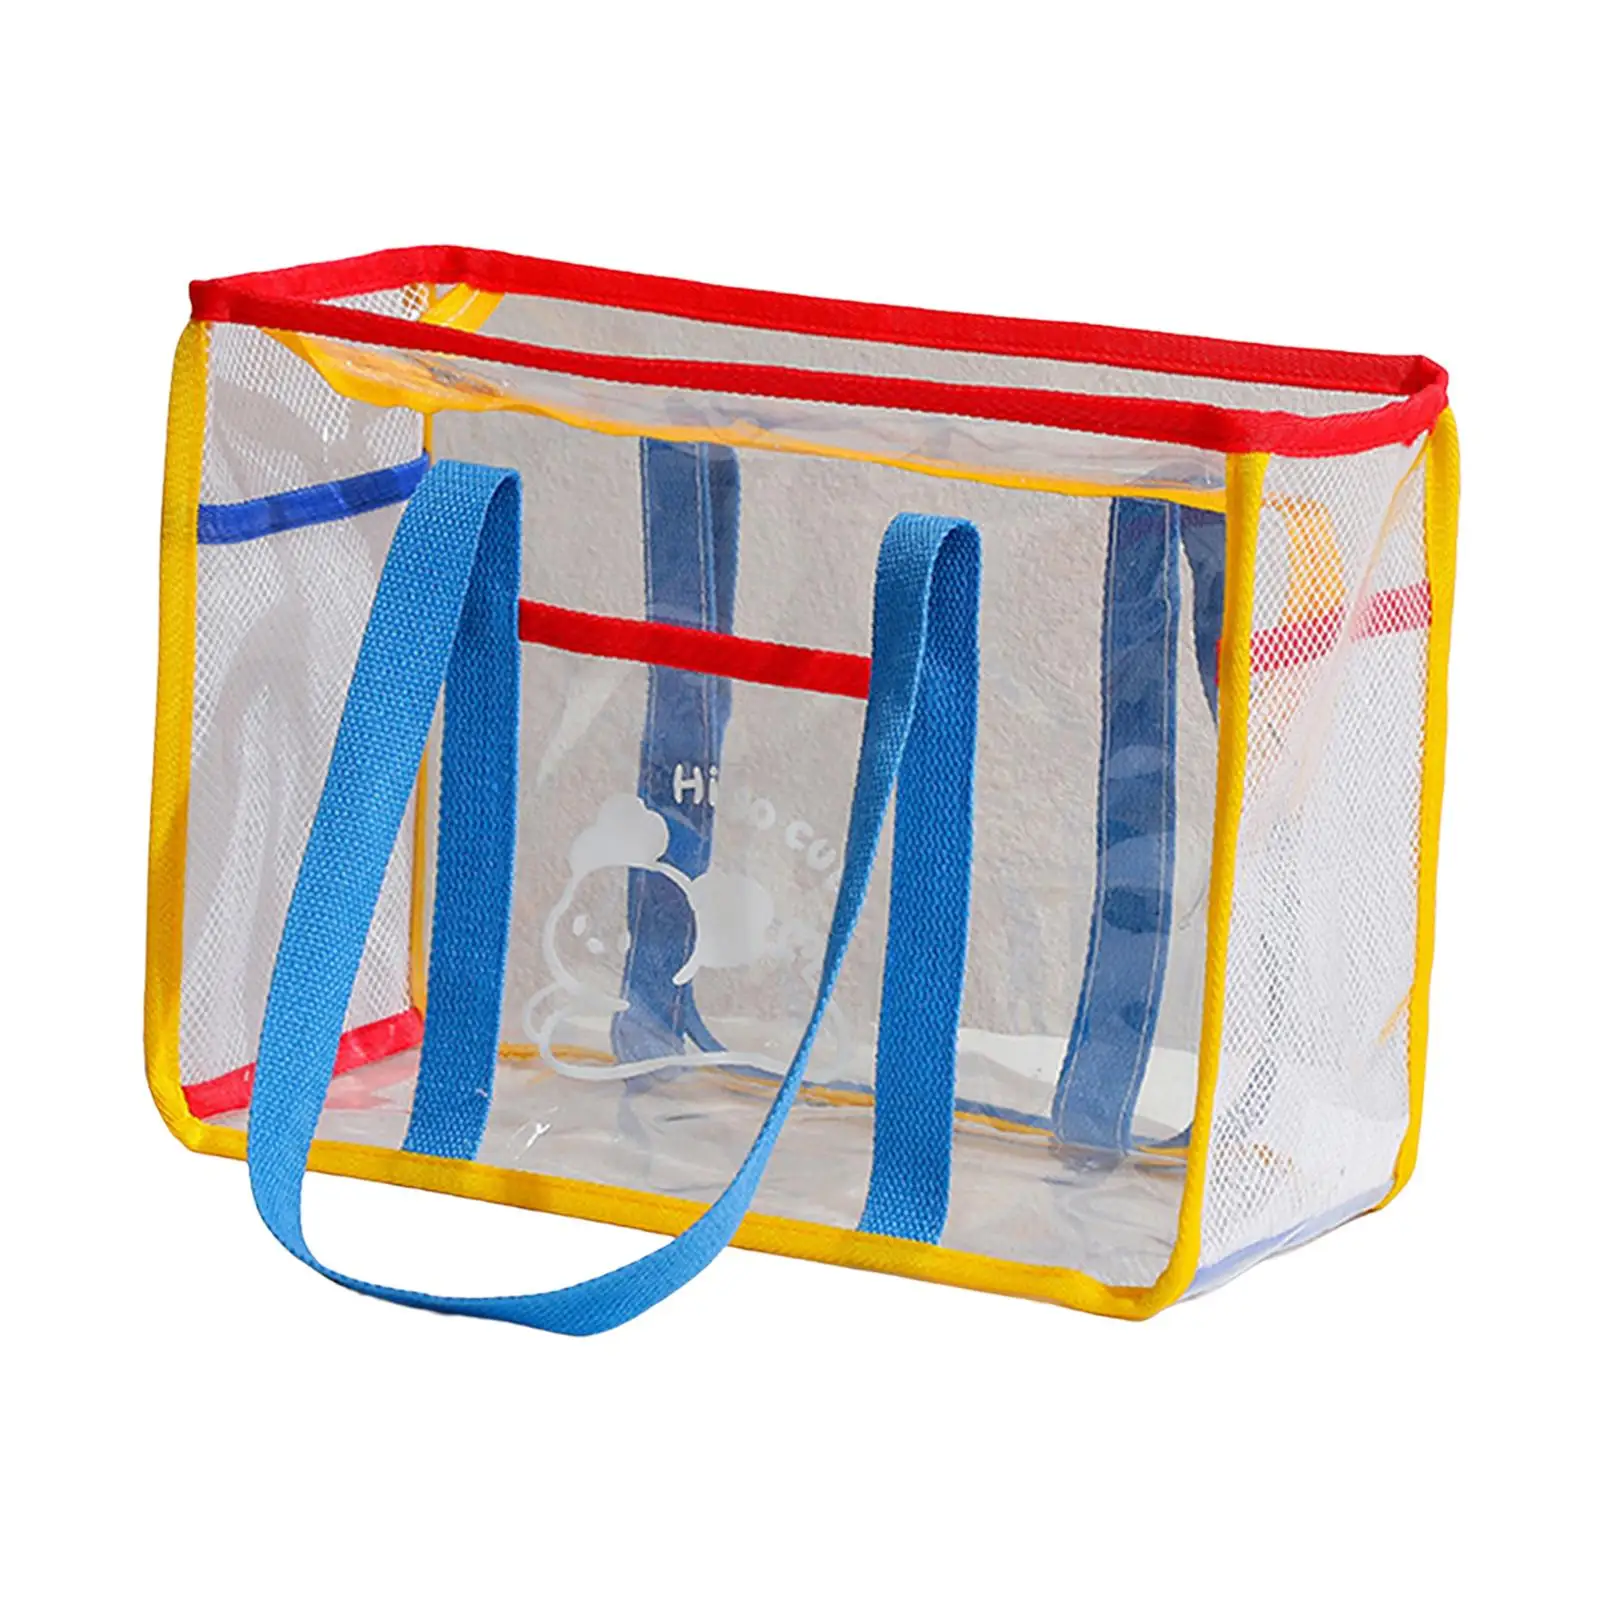 Transparent Bag Durable Pouch Travel Bags Stylish Versatile Girls PVC Clear Tote Bag for Swimming Office Vacation Camping Hiking